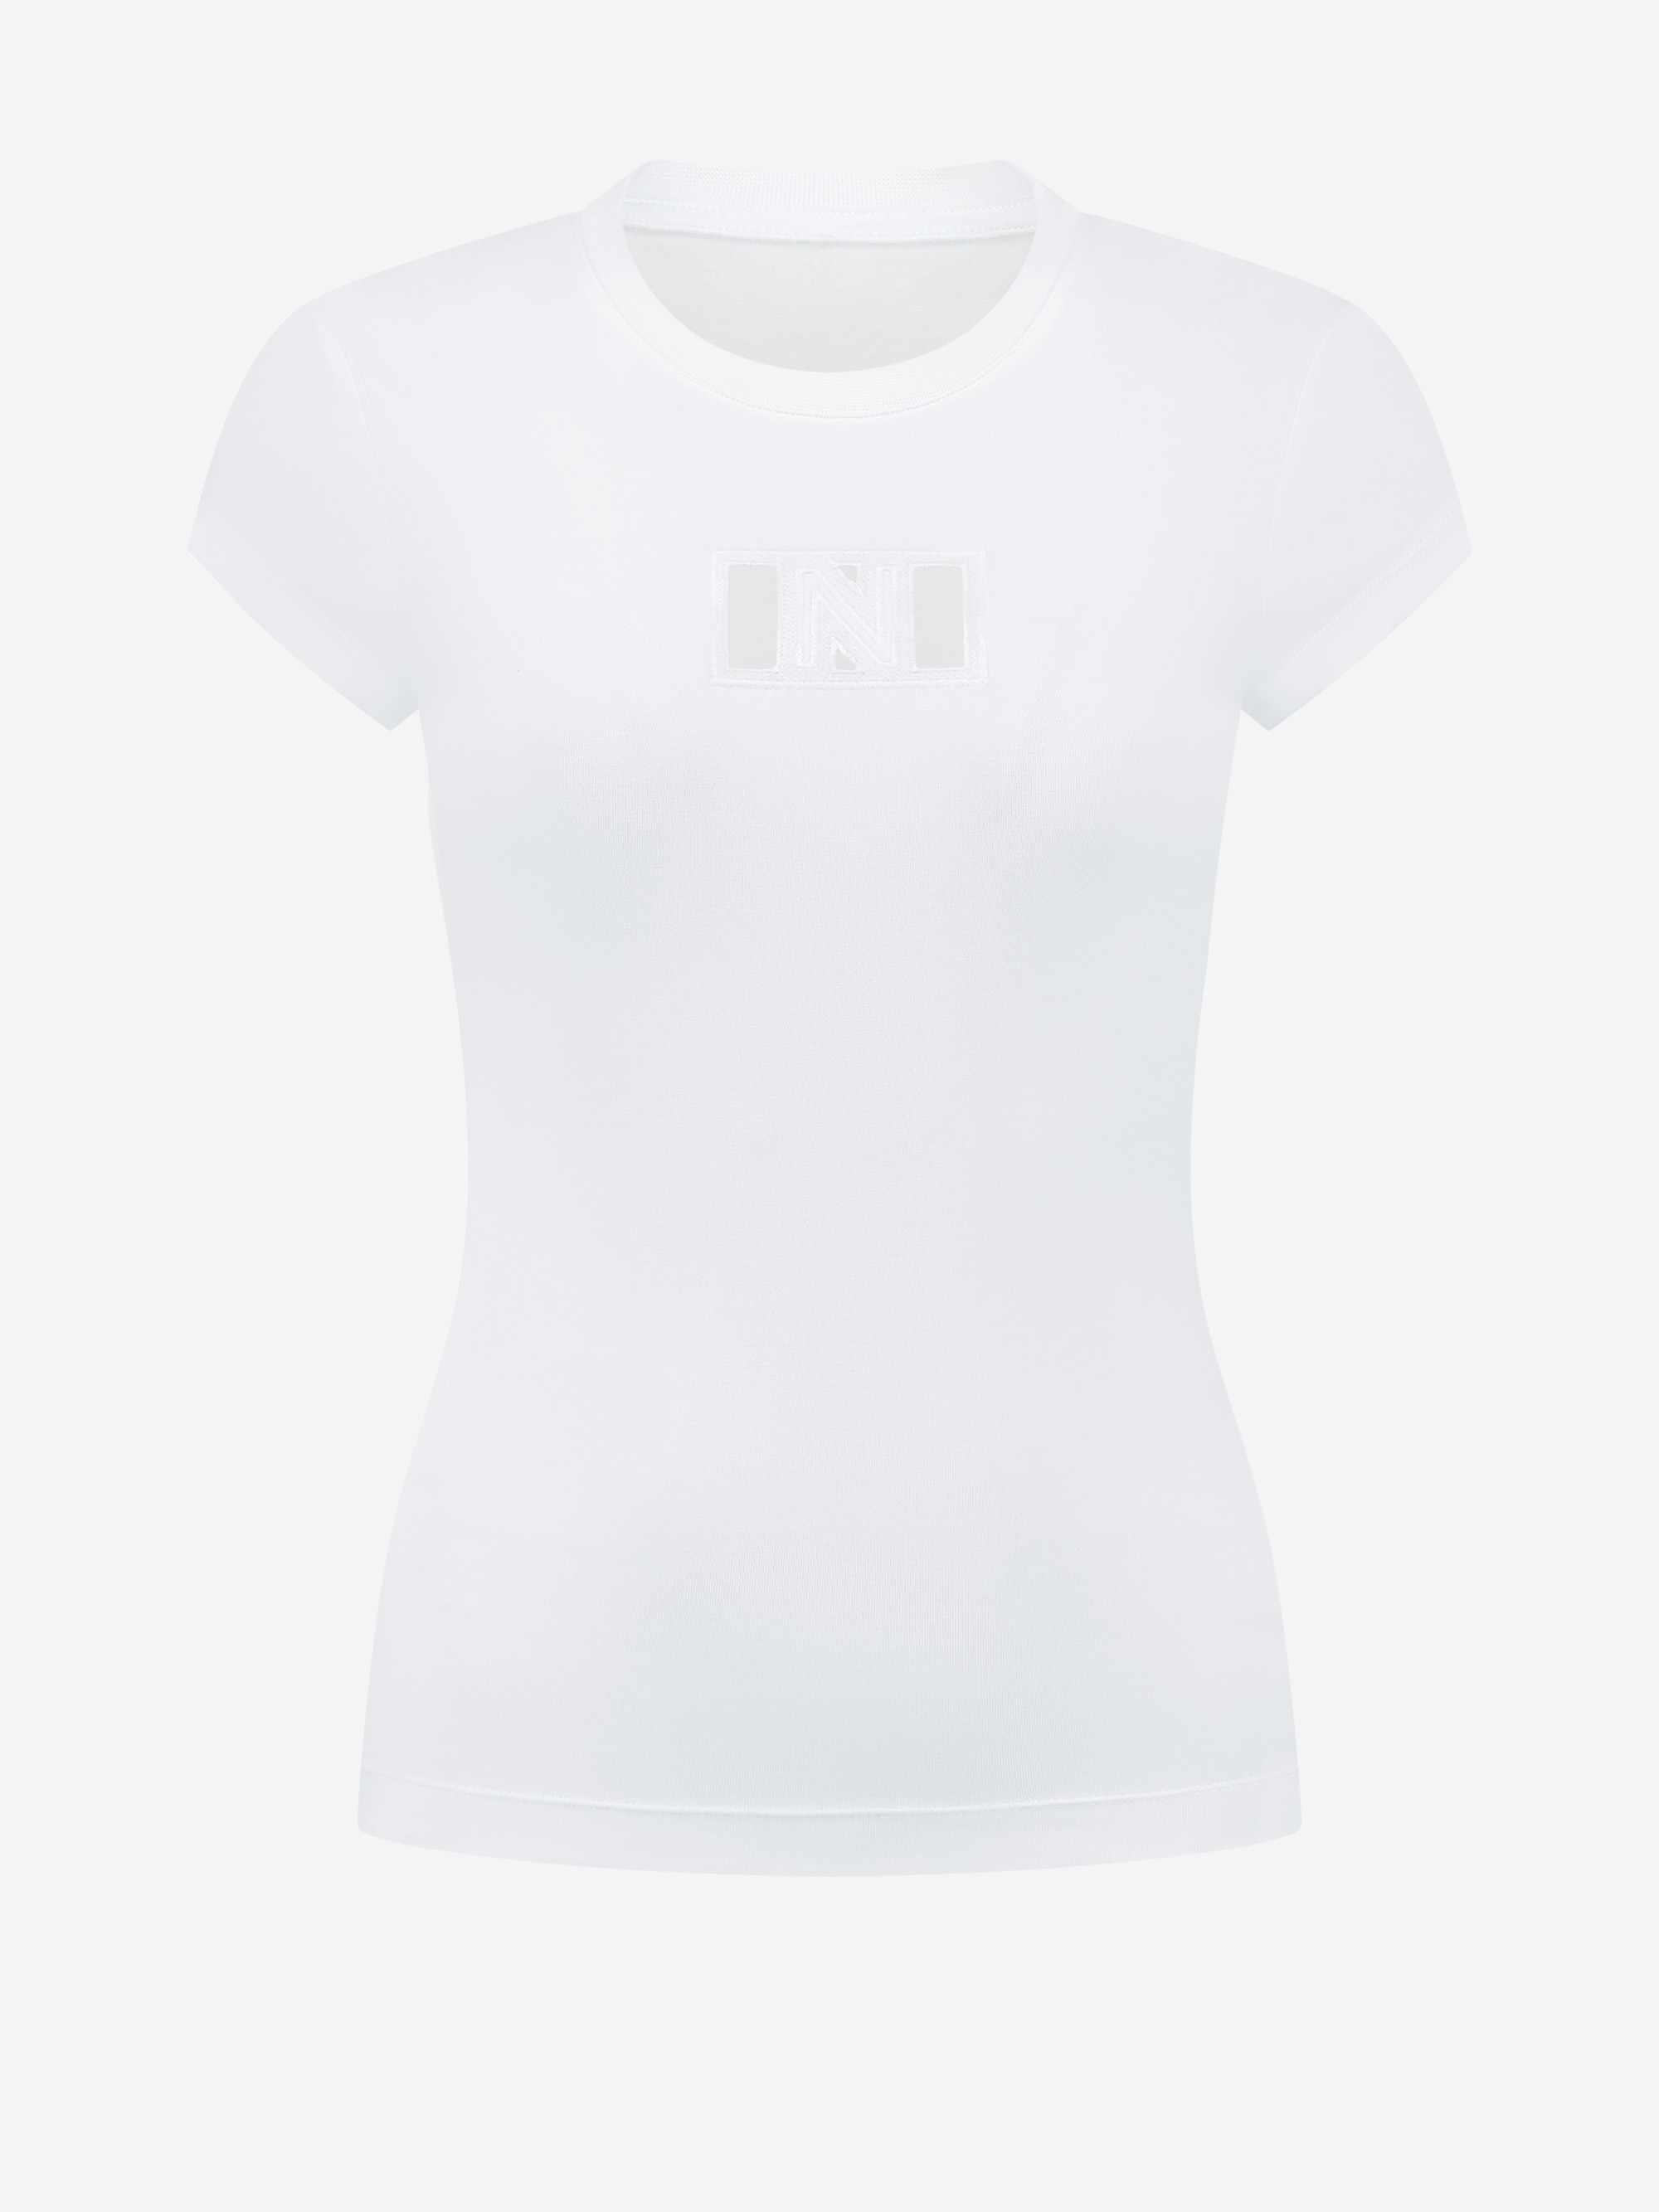 T-shirt with N-logo